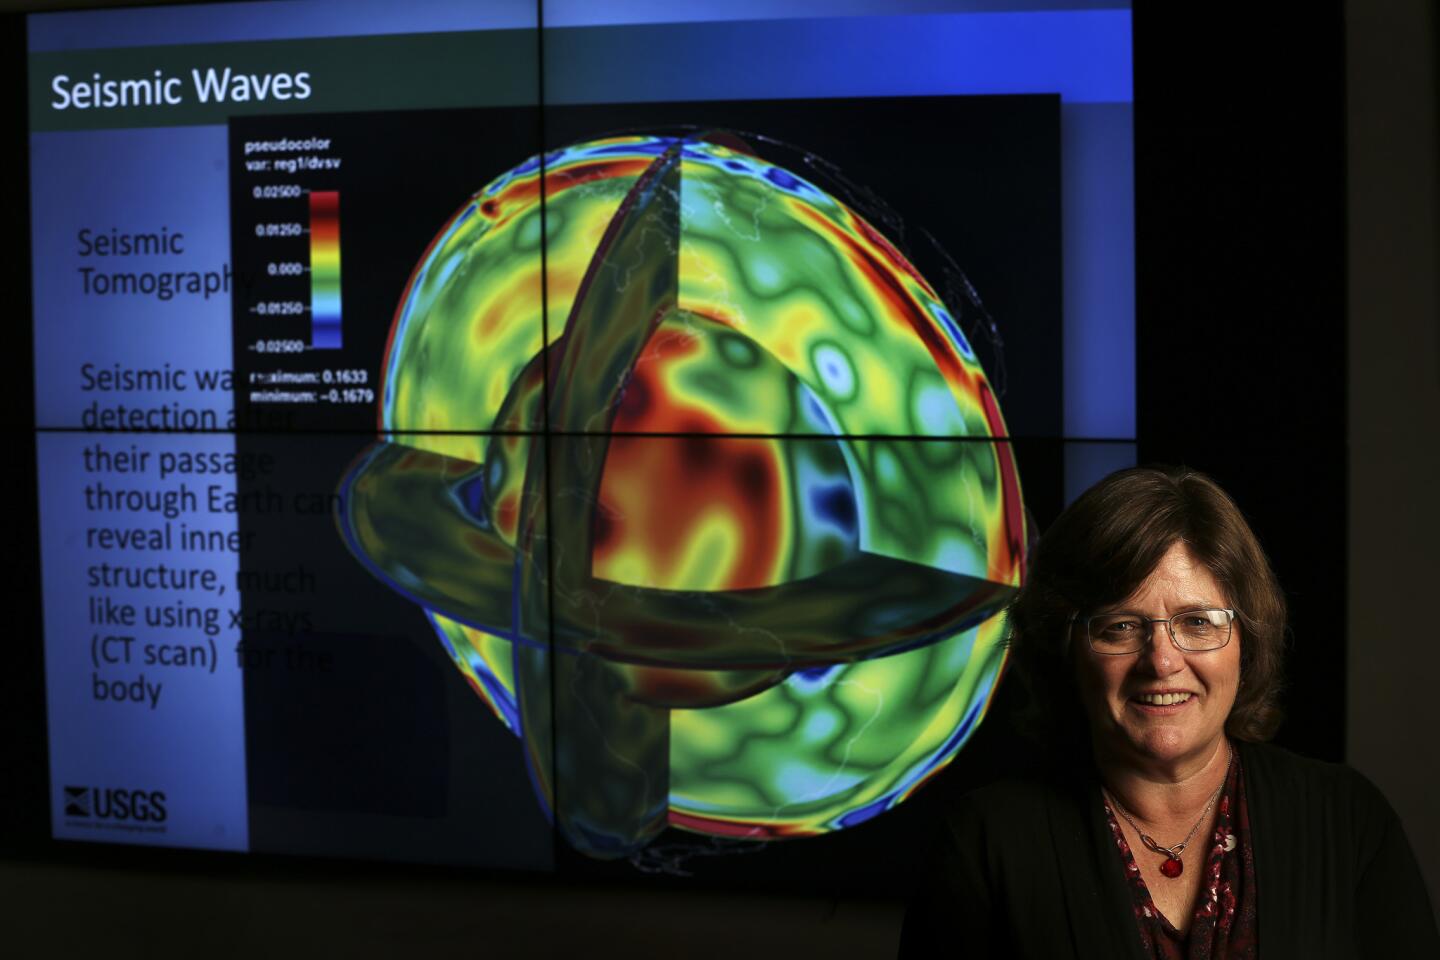 Lucy Jones standsnext to a projected image of seismic waves inside the media room at Caltech. Much of what Jones does today centers on this: What good is scientific knowledge if people don’t use it?